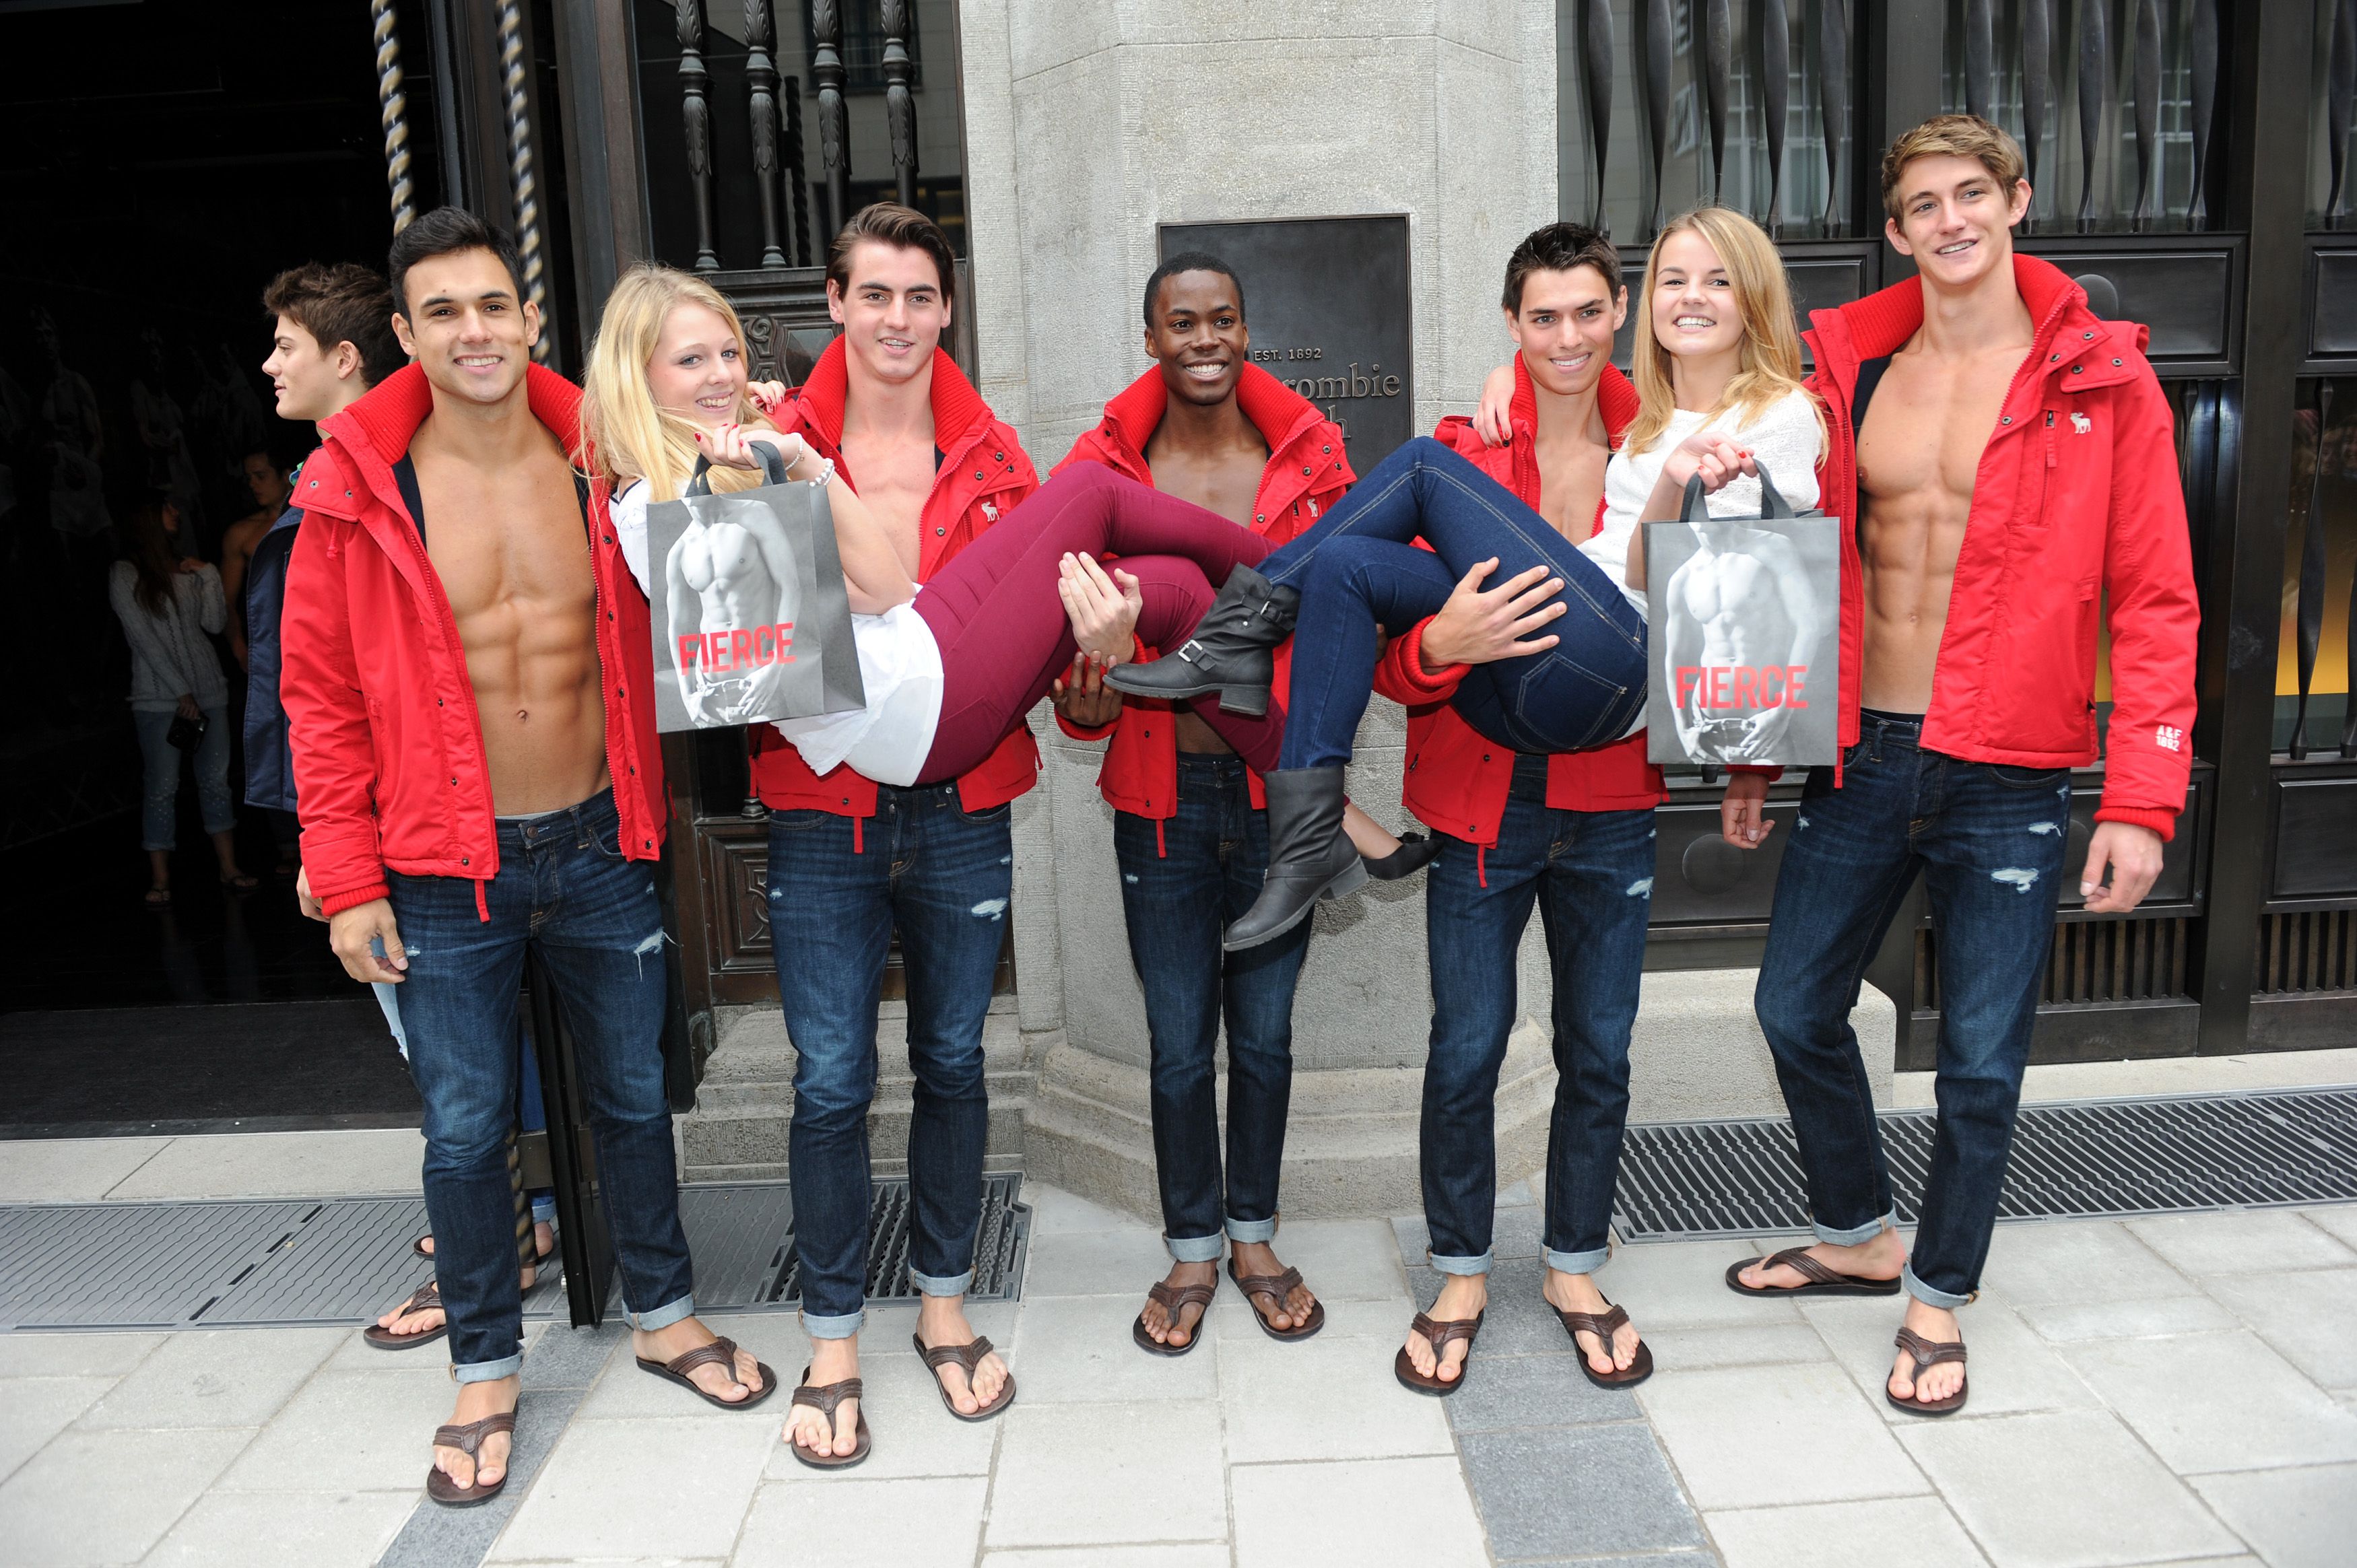 abercrombie and fitch employee benefits